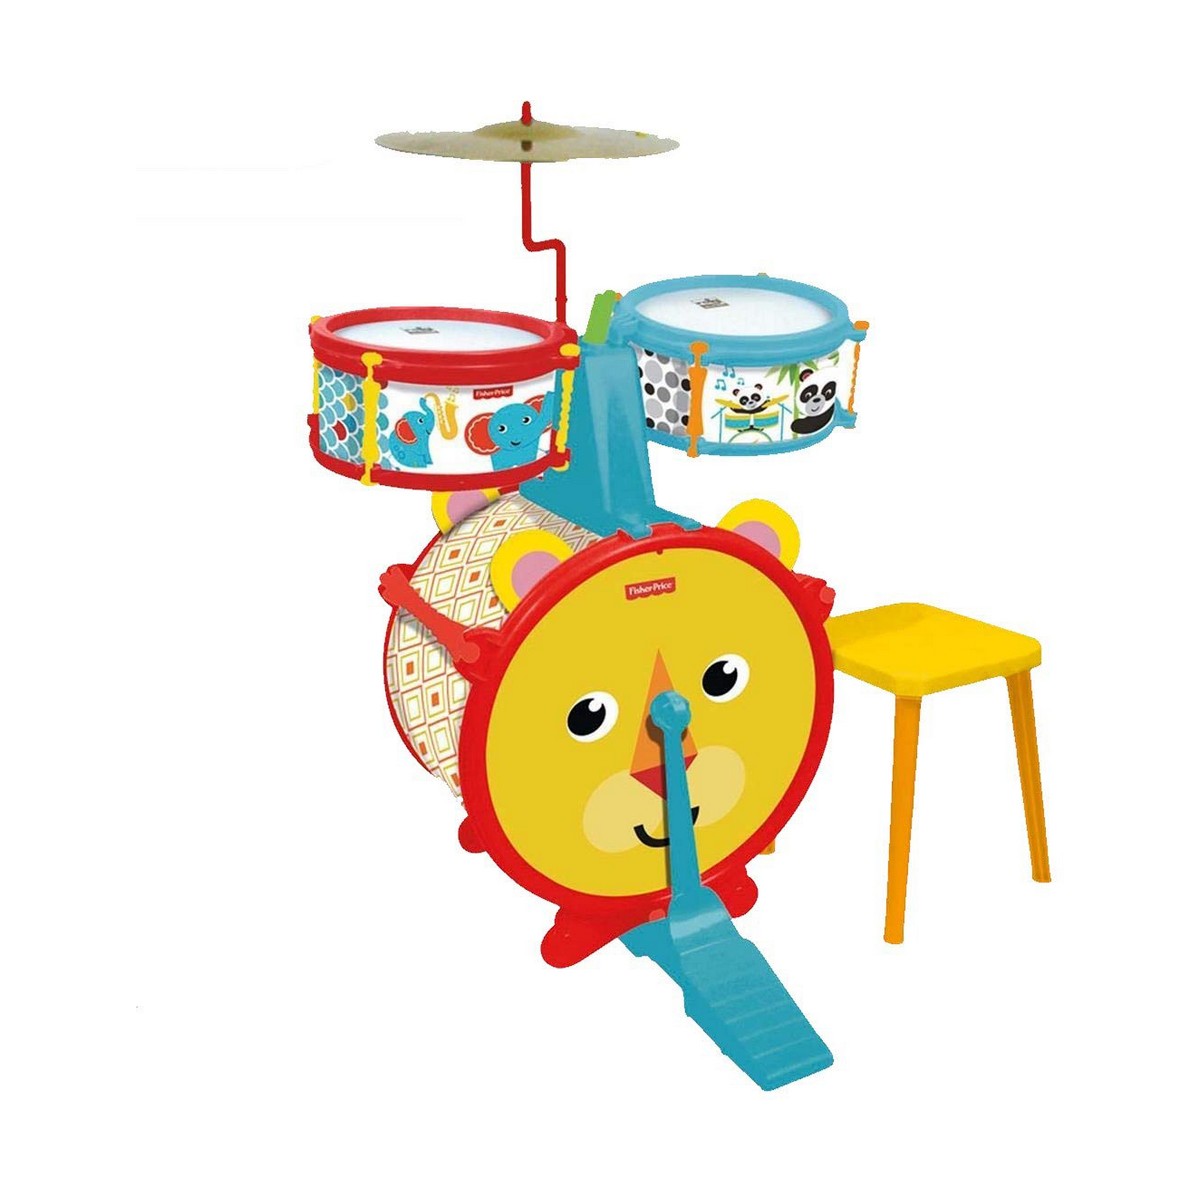 Batterie musicale Reig Fisher Price animaux Plastique